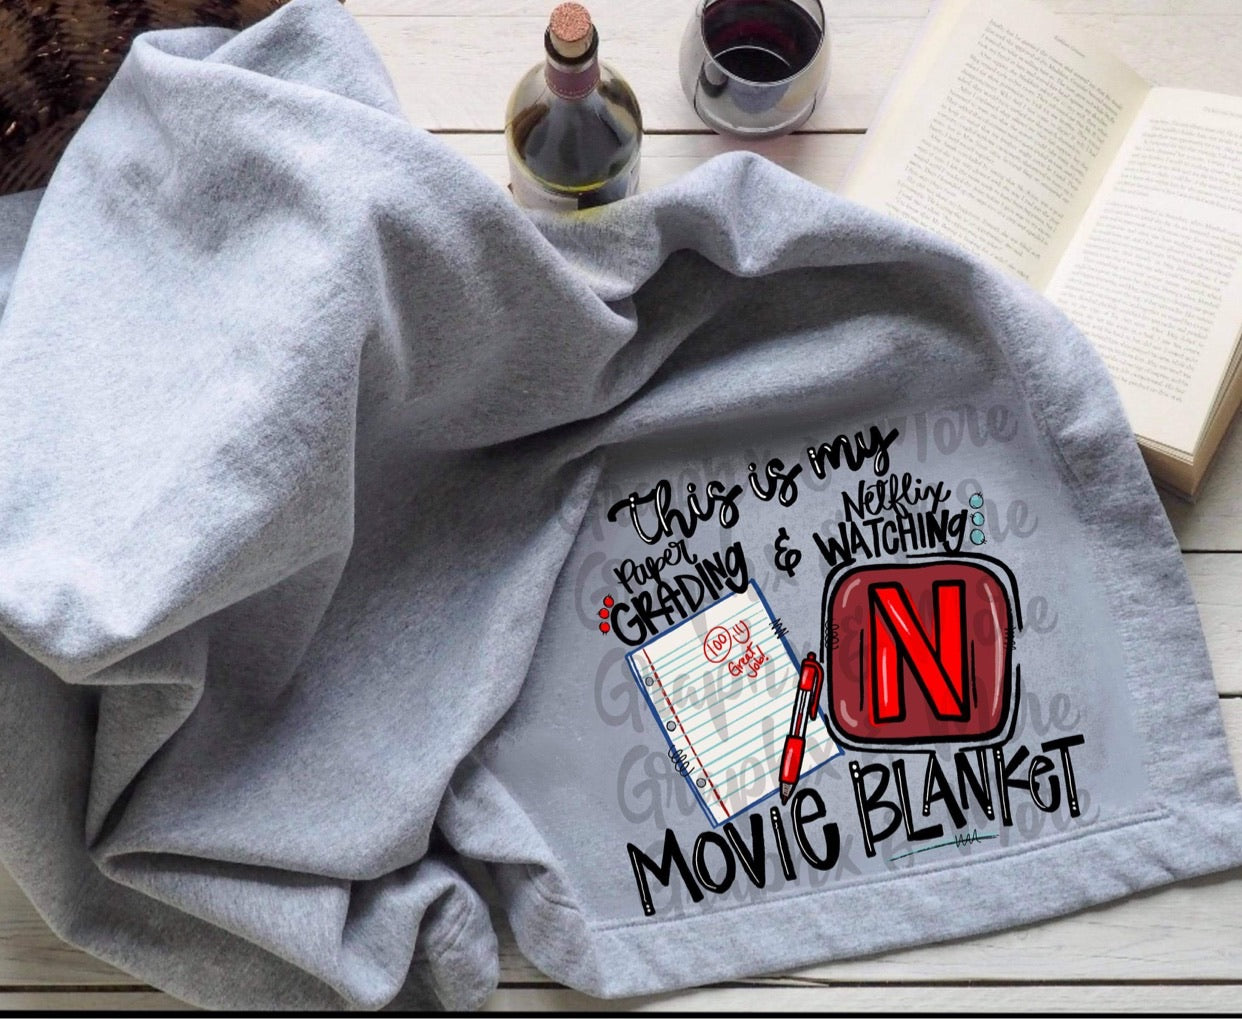 This is my paper grading movie watching blanket